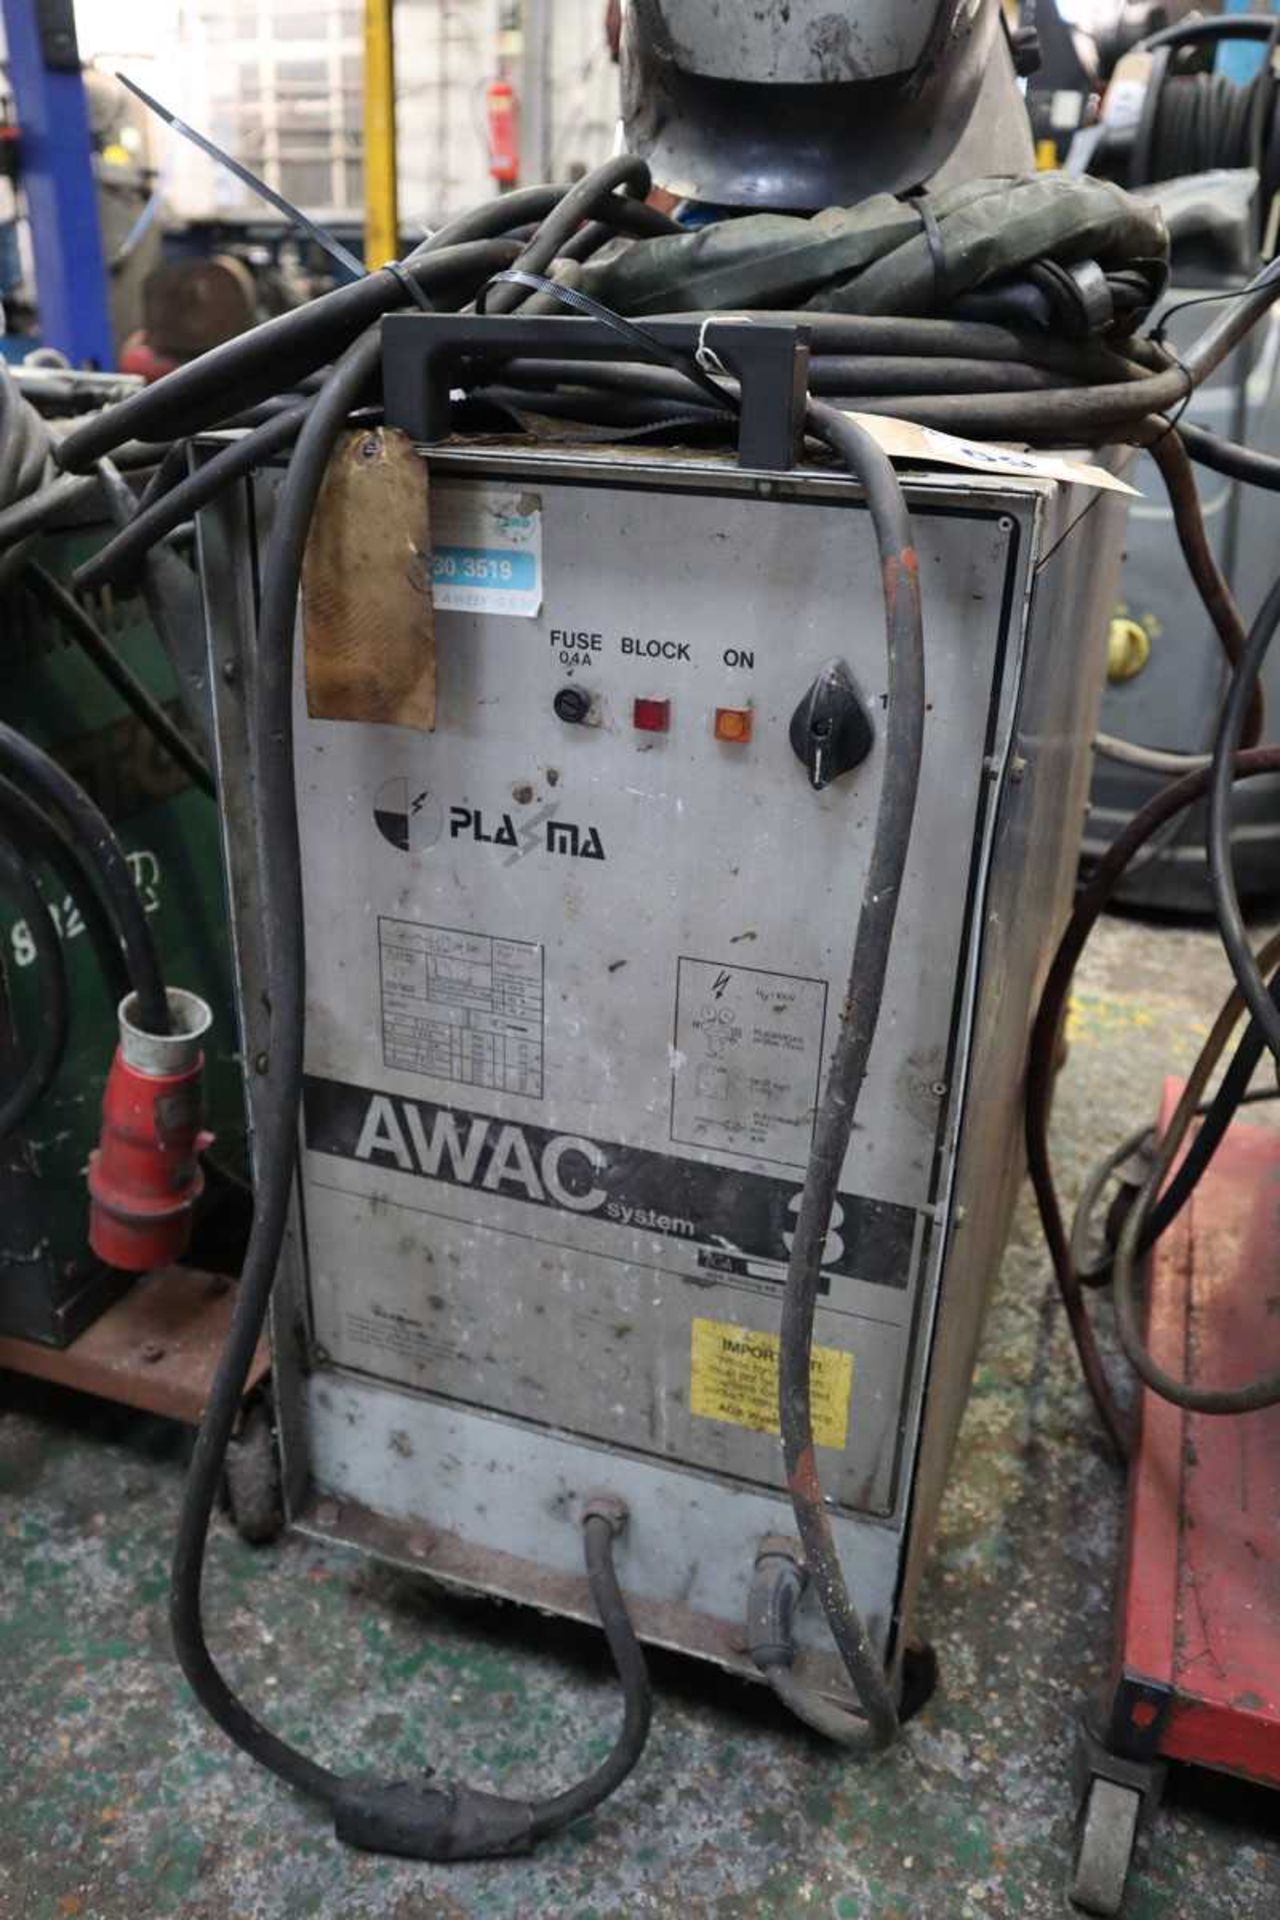 +VAT AGA plasma AWAC system no.3 mig welder with associated cabling plus 1 helmet and 1 mask, single - Image 2 of 2